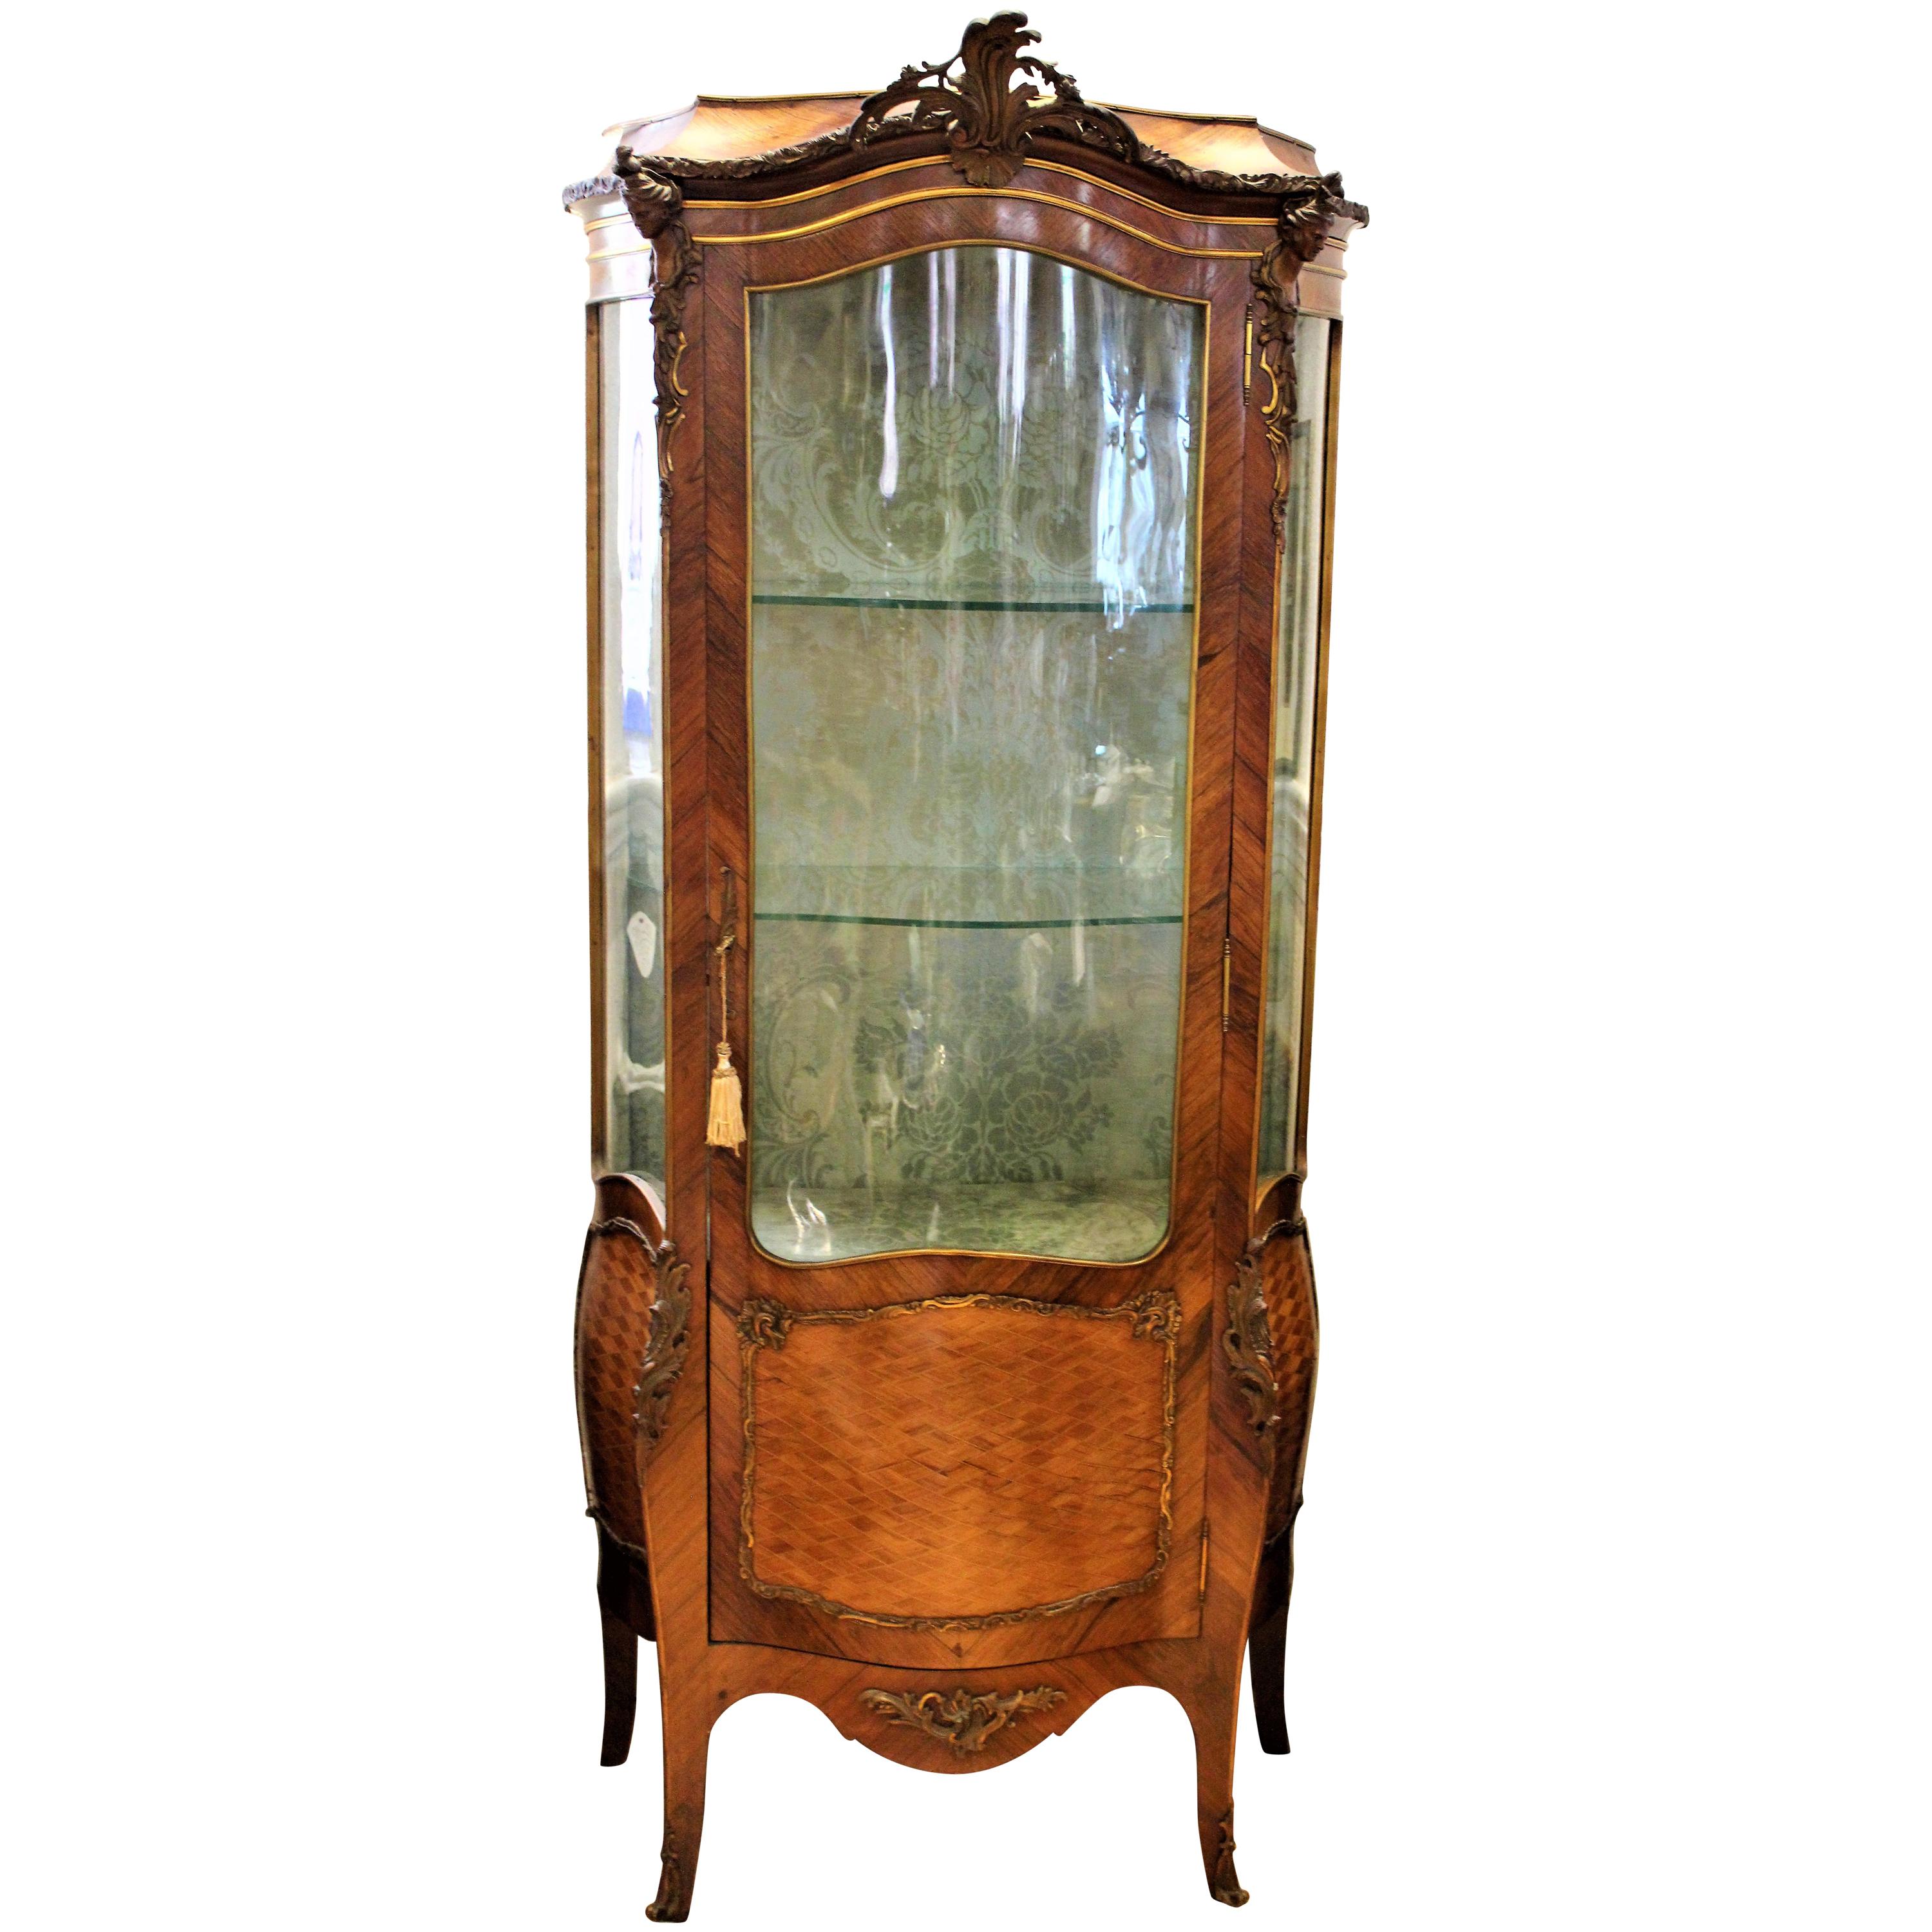 Antique French Formed Walnut Bombay Shaped Vitrine Cabinet with Bronze Mounts